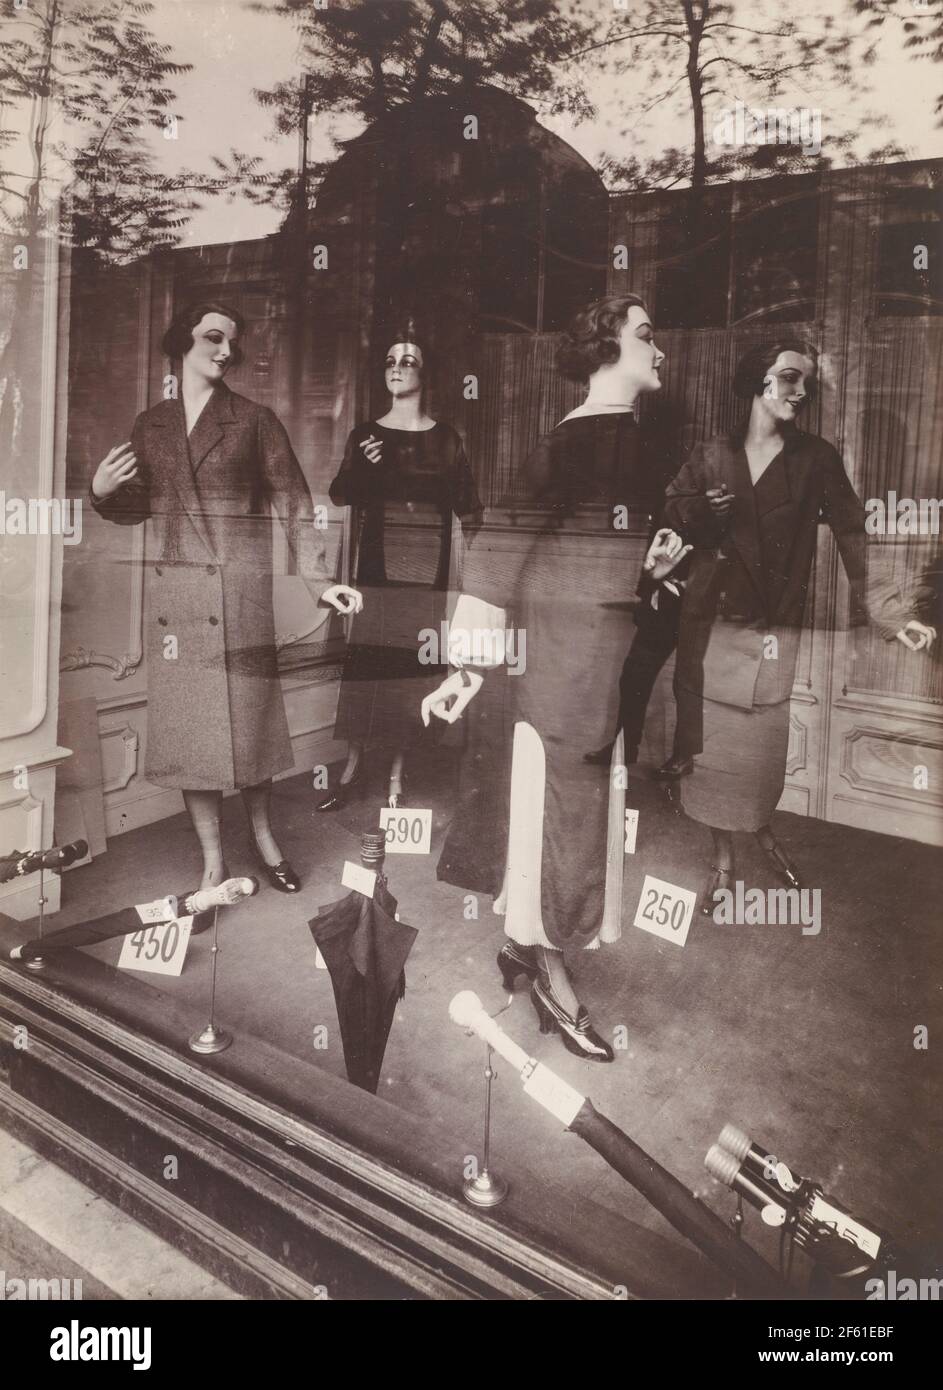 Shop window, Avenue des Gobelins, Paris, France, circa 1925 by Eurgene Atget.   Eugène Atget, full name Jean-Eugène-Auguste Atget, 1857 - 1927.  French photographer, famed for his decades long work to document the architecture and aura of Paris before all was lost to modernisation. Stock Photo